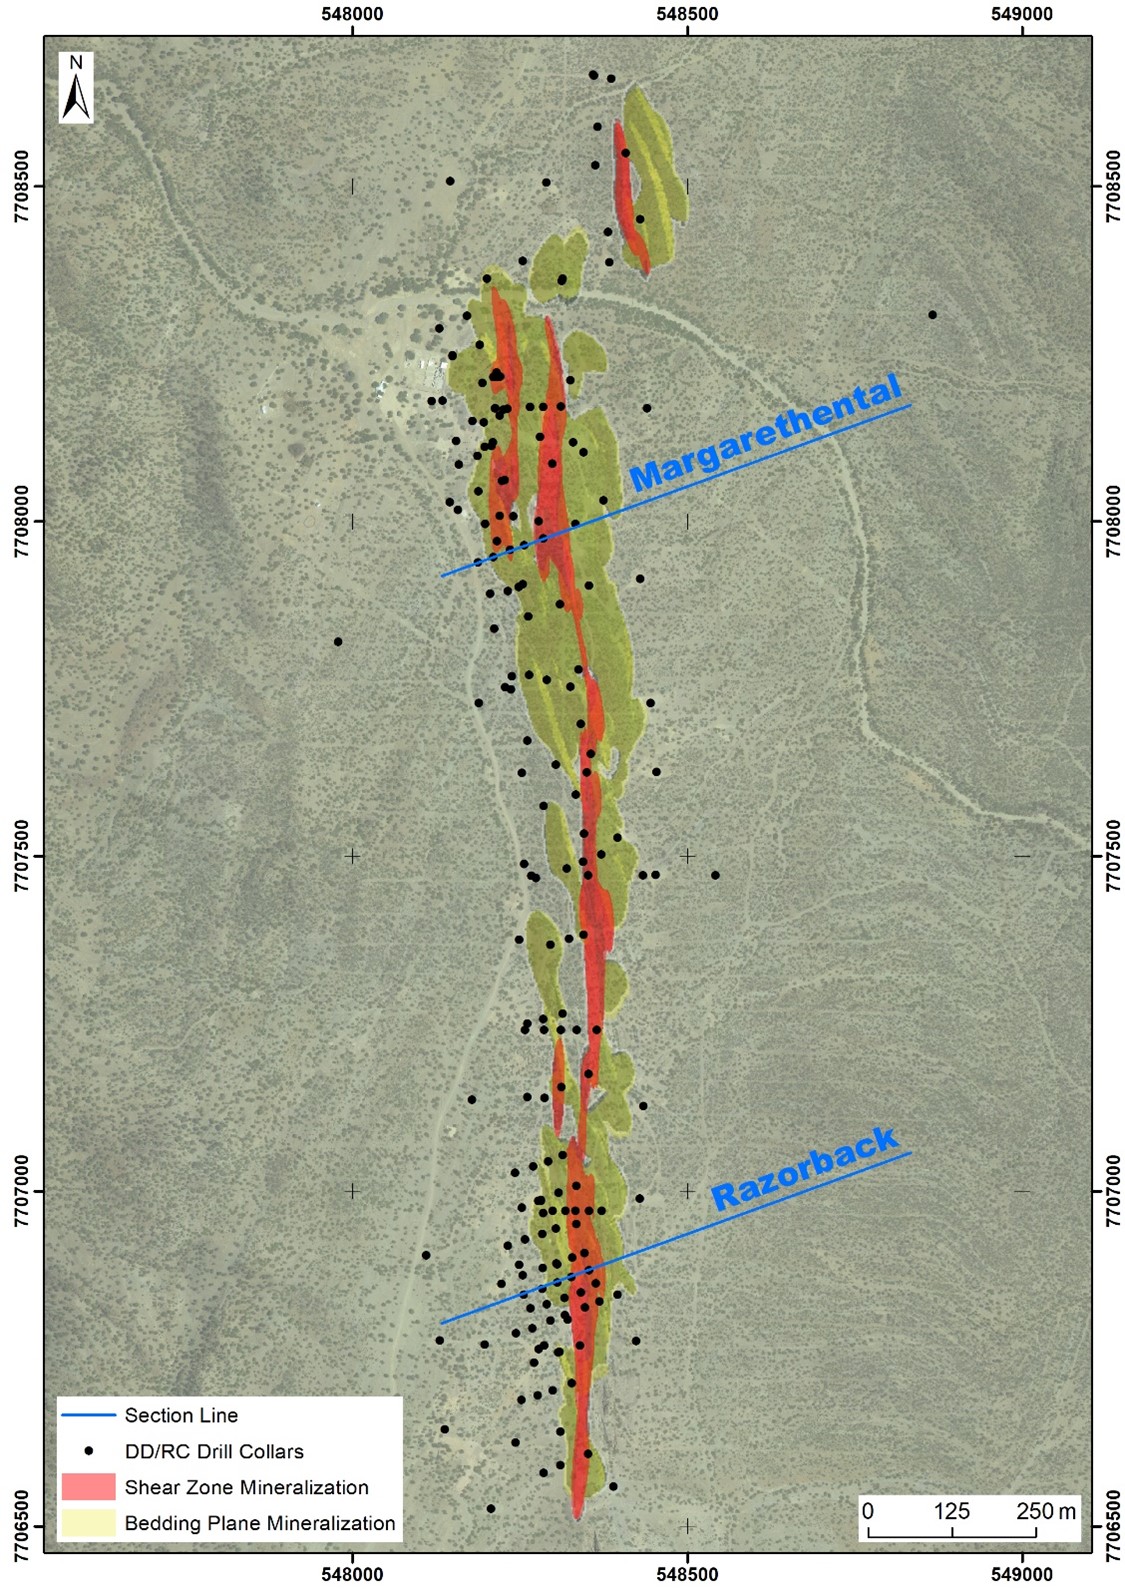 Figure 4: Section line locations shown in plan view with mineralization domains and drillhole collars